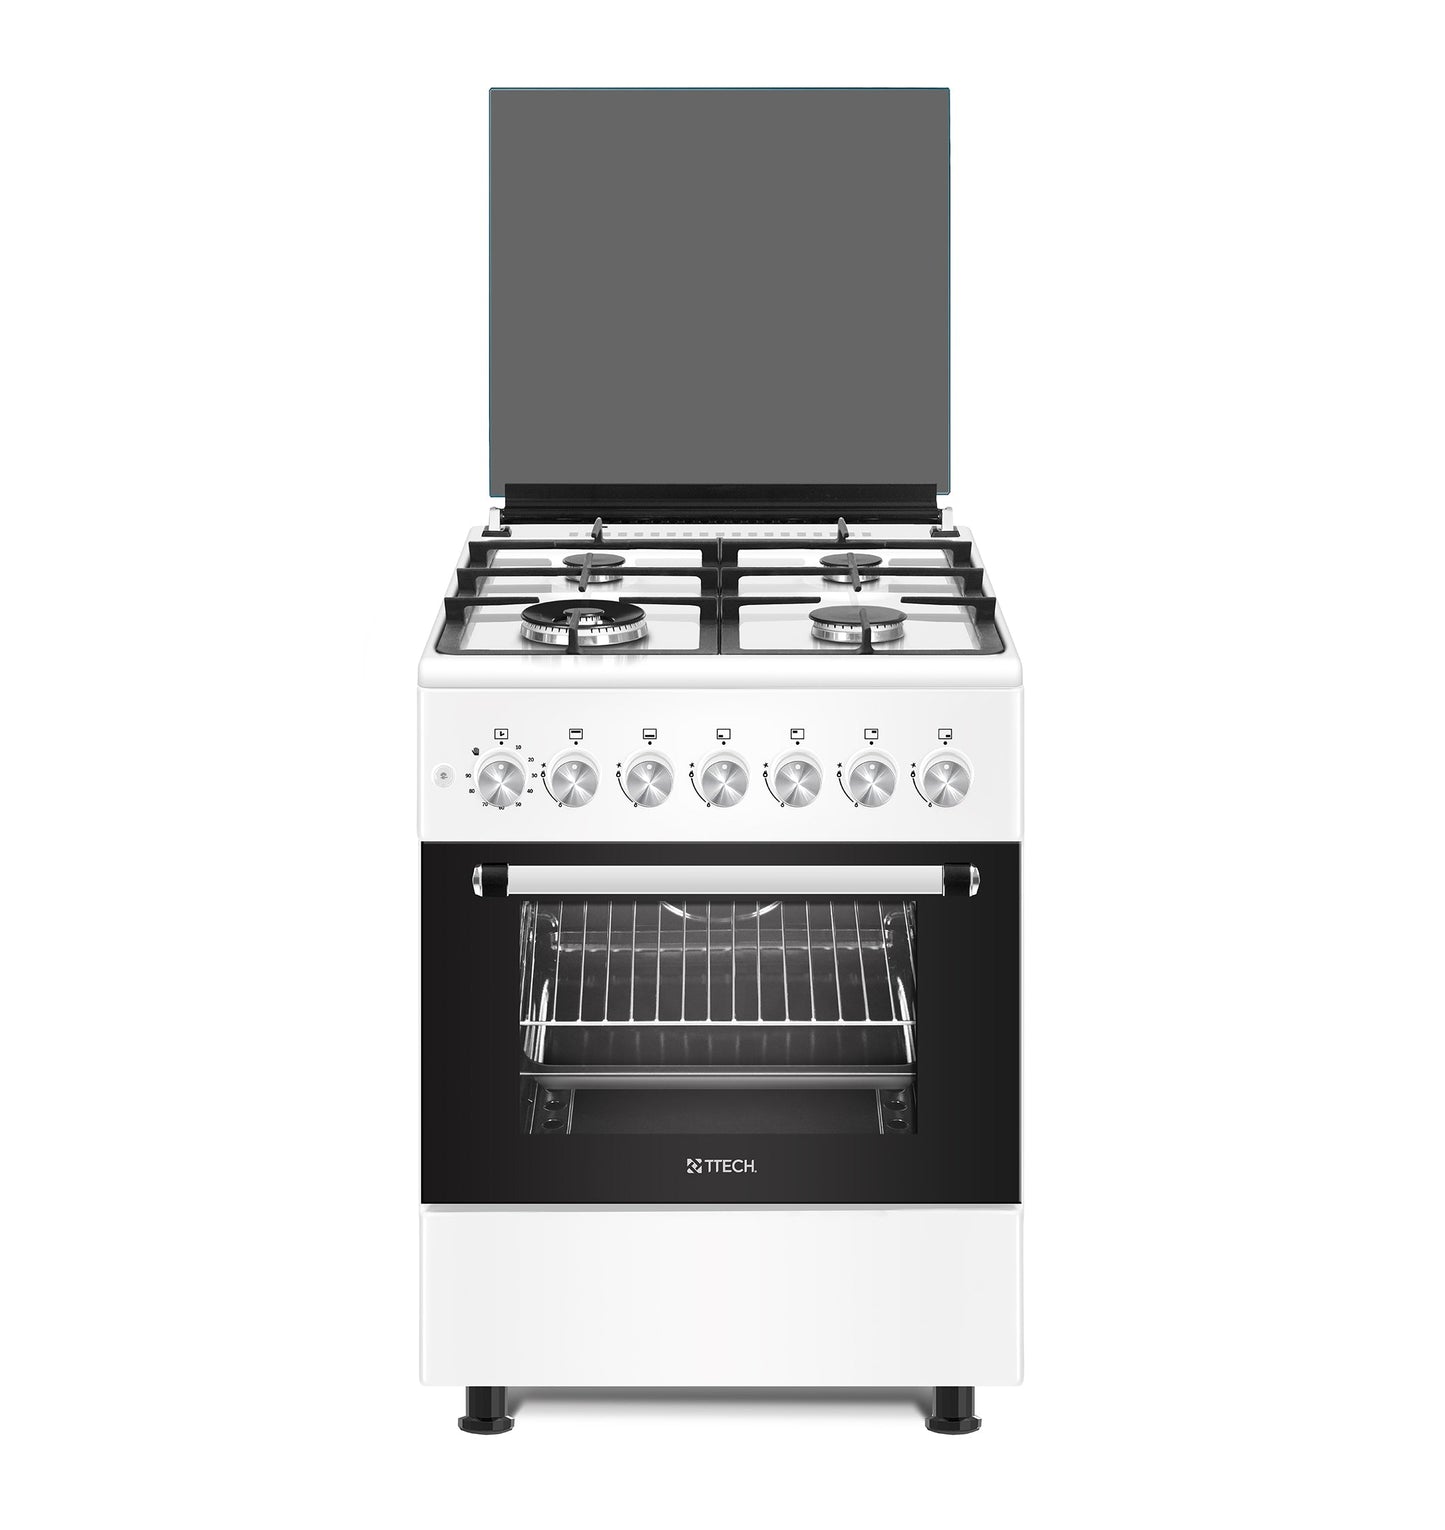 T-TECH TRENDY STYLE SERIES 60X60 FULL GAS FREE STANDING COOKER, 4 GAS EURO POOL TYPE BURNERS, GAS OVEN & GAS GRILL, MECHANICAL TIMER, WHITE - F6TS40G2 WB